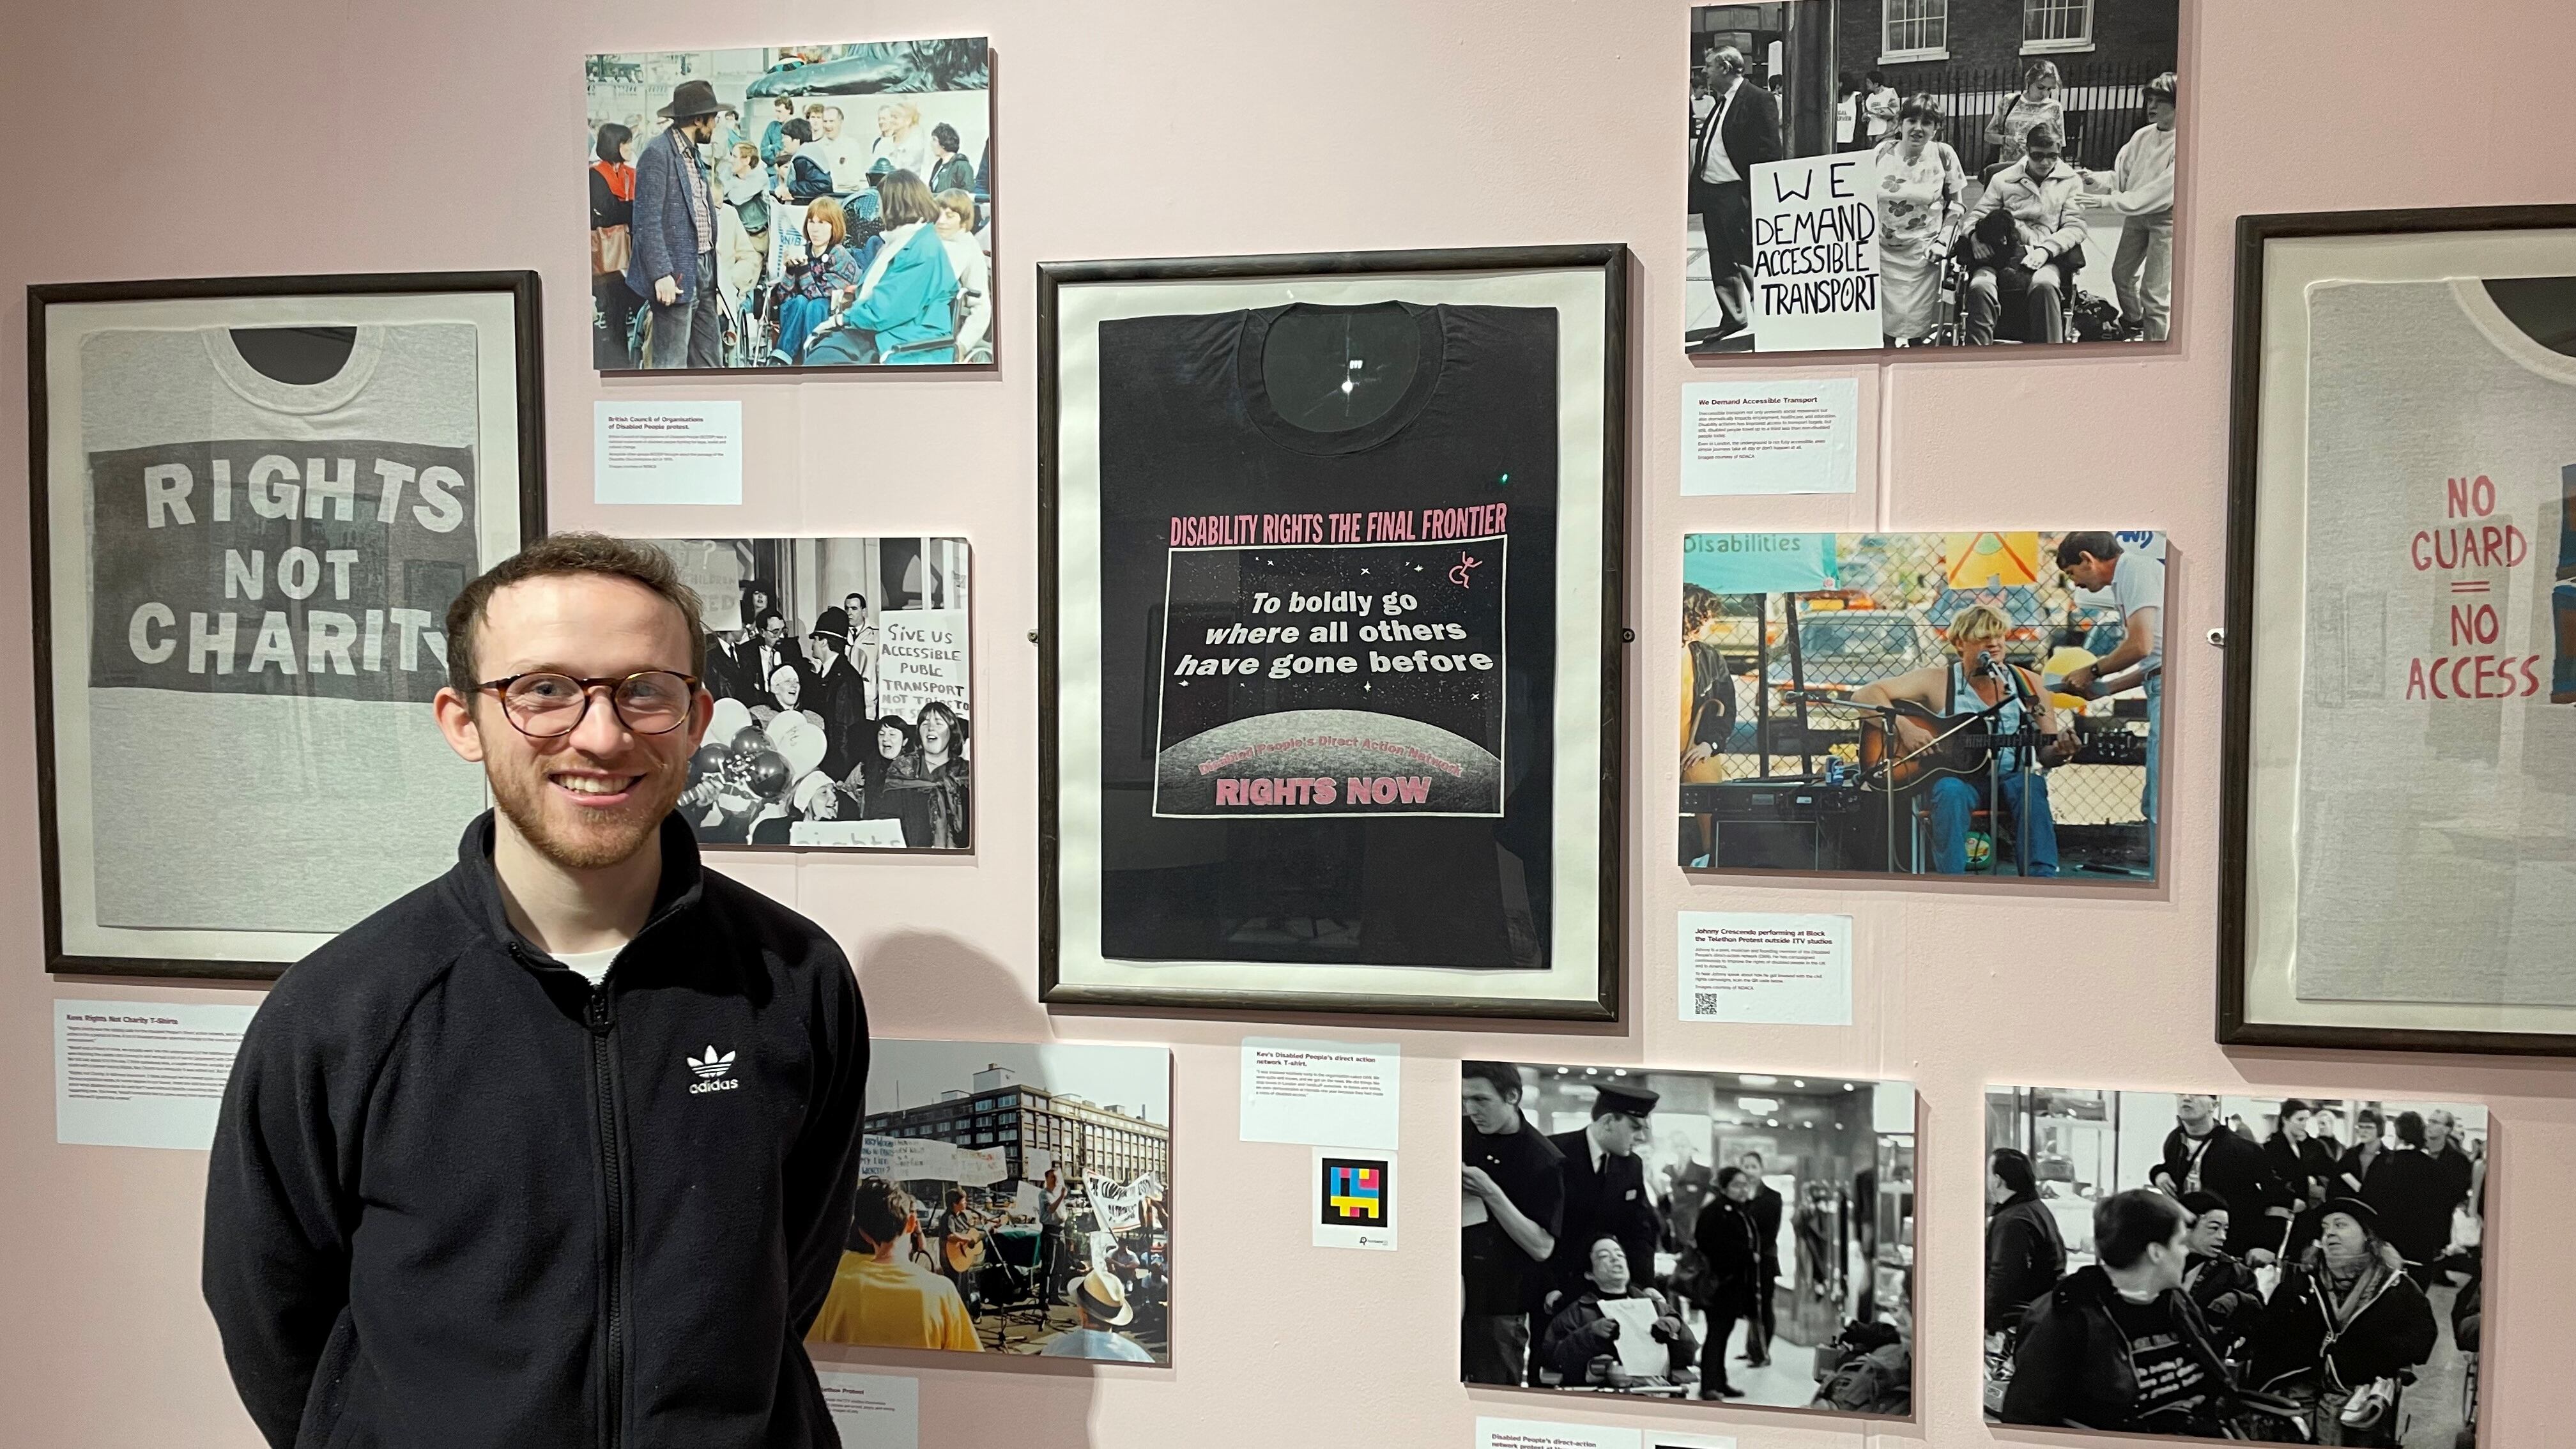 Jack Guy joined Hastings Museum & Art Gallery through the Curating For Change scheme and led the Stored Out Of Sight exhibition project